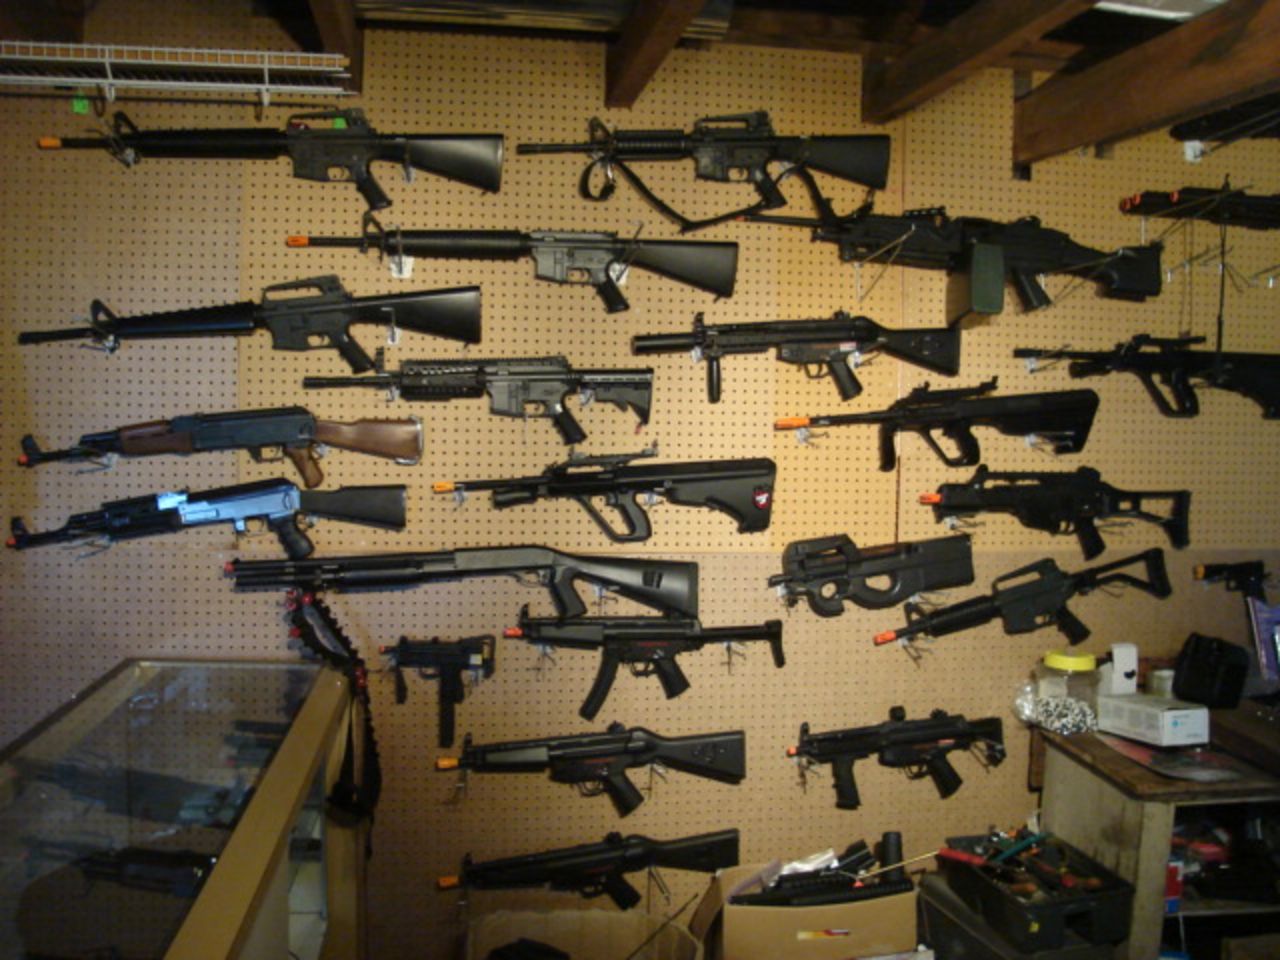 Venezuelan Vice President Diosdado Cabello shared on television a photo showing an arsenal of "assault weapons" that he said belonged to a retired general involved in a standoff with authorities. The photo actually shows a collection of air rifles used by hobbyists. The photo was taken from the website of a rental shop in Wisconsin. 